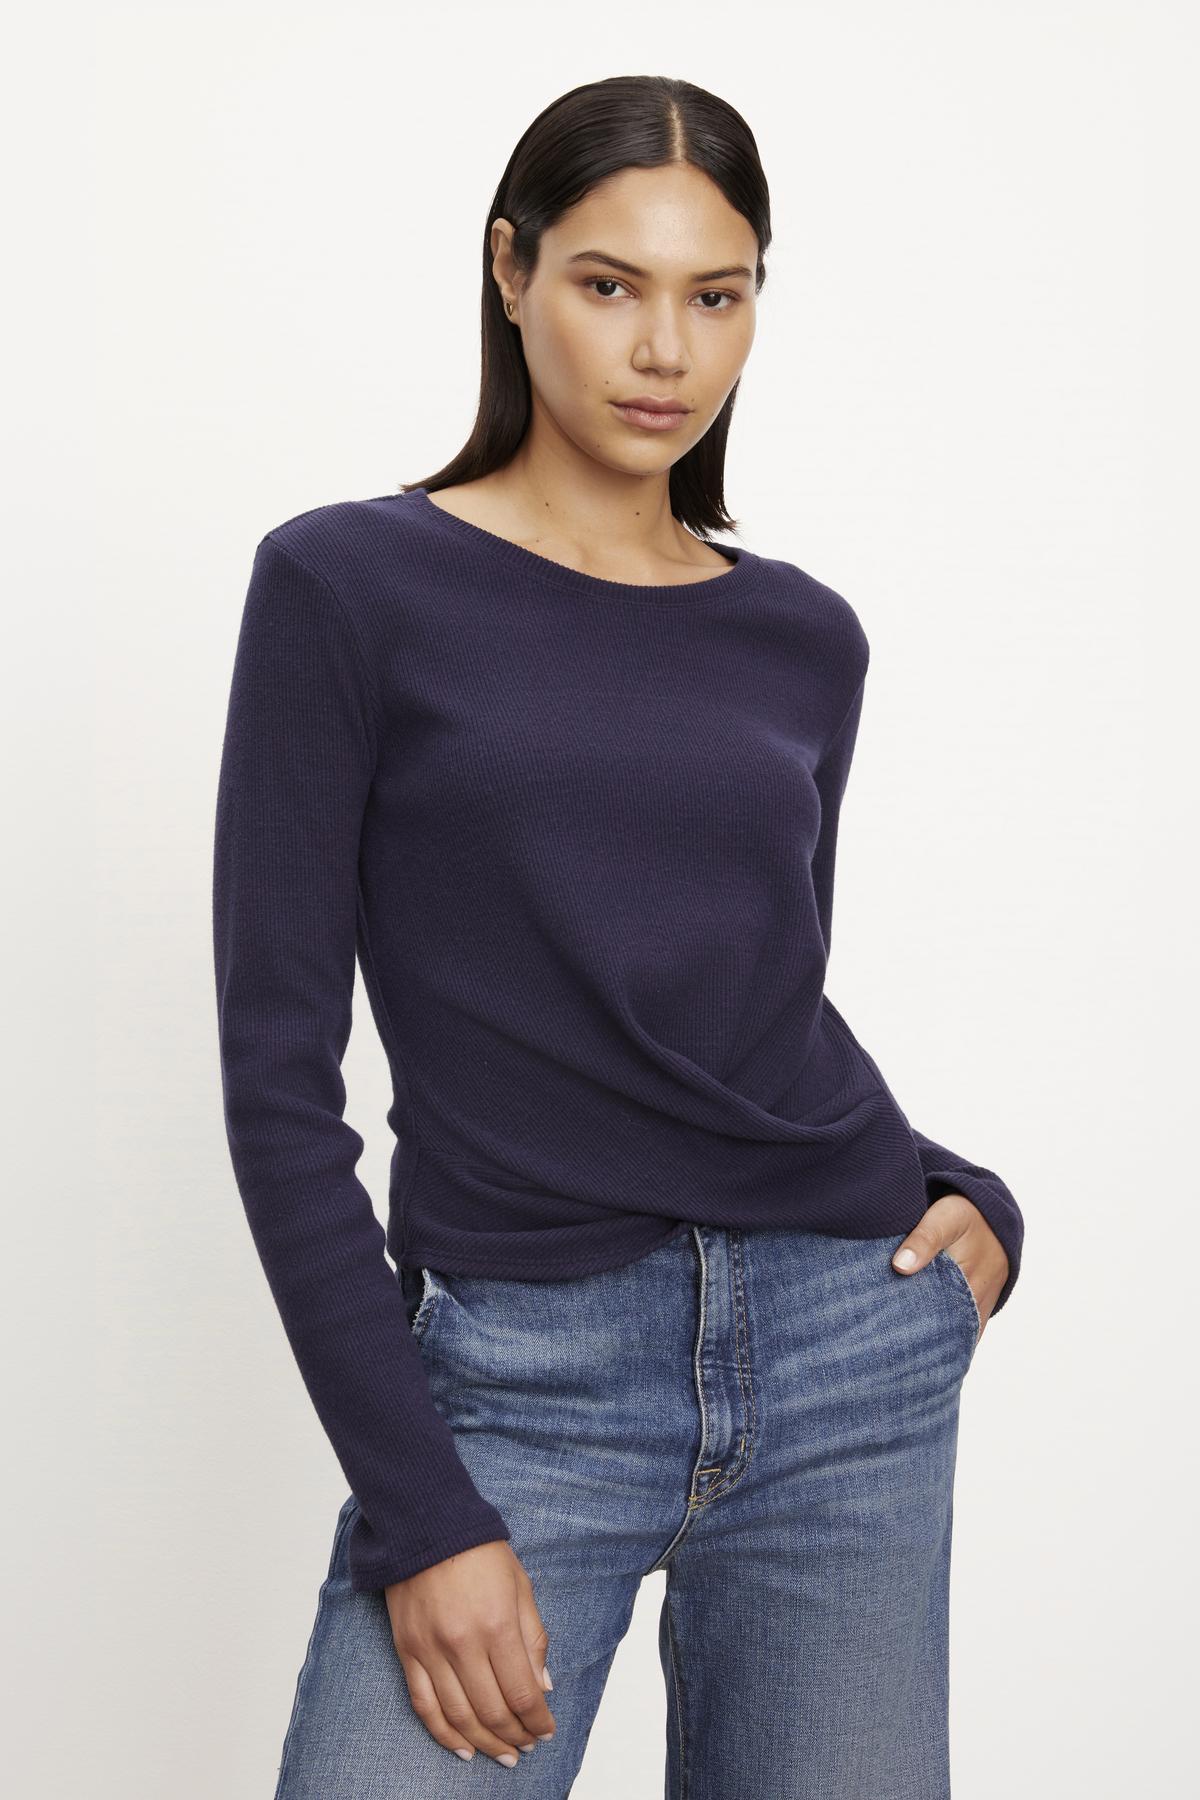 The model is wearing a GEONNA BRUSHED RIB TOP sweater and jeans.-36095789990081